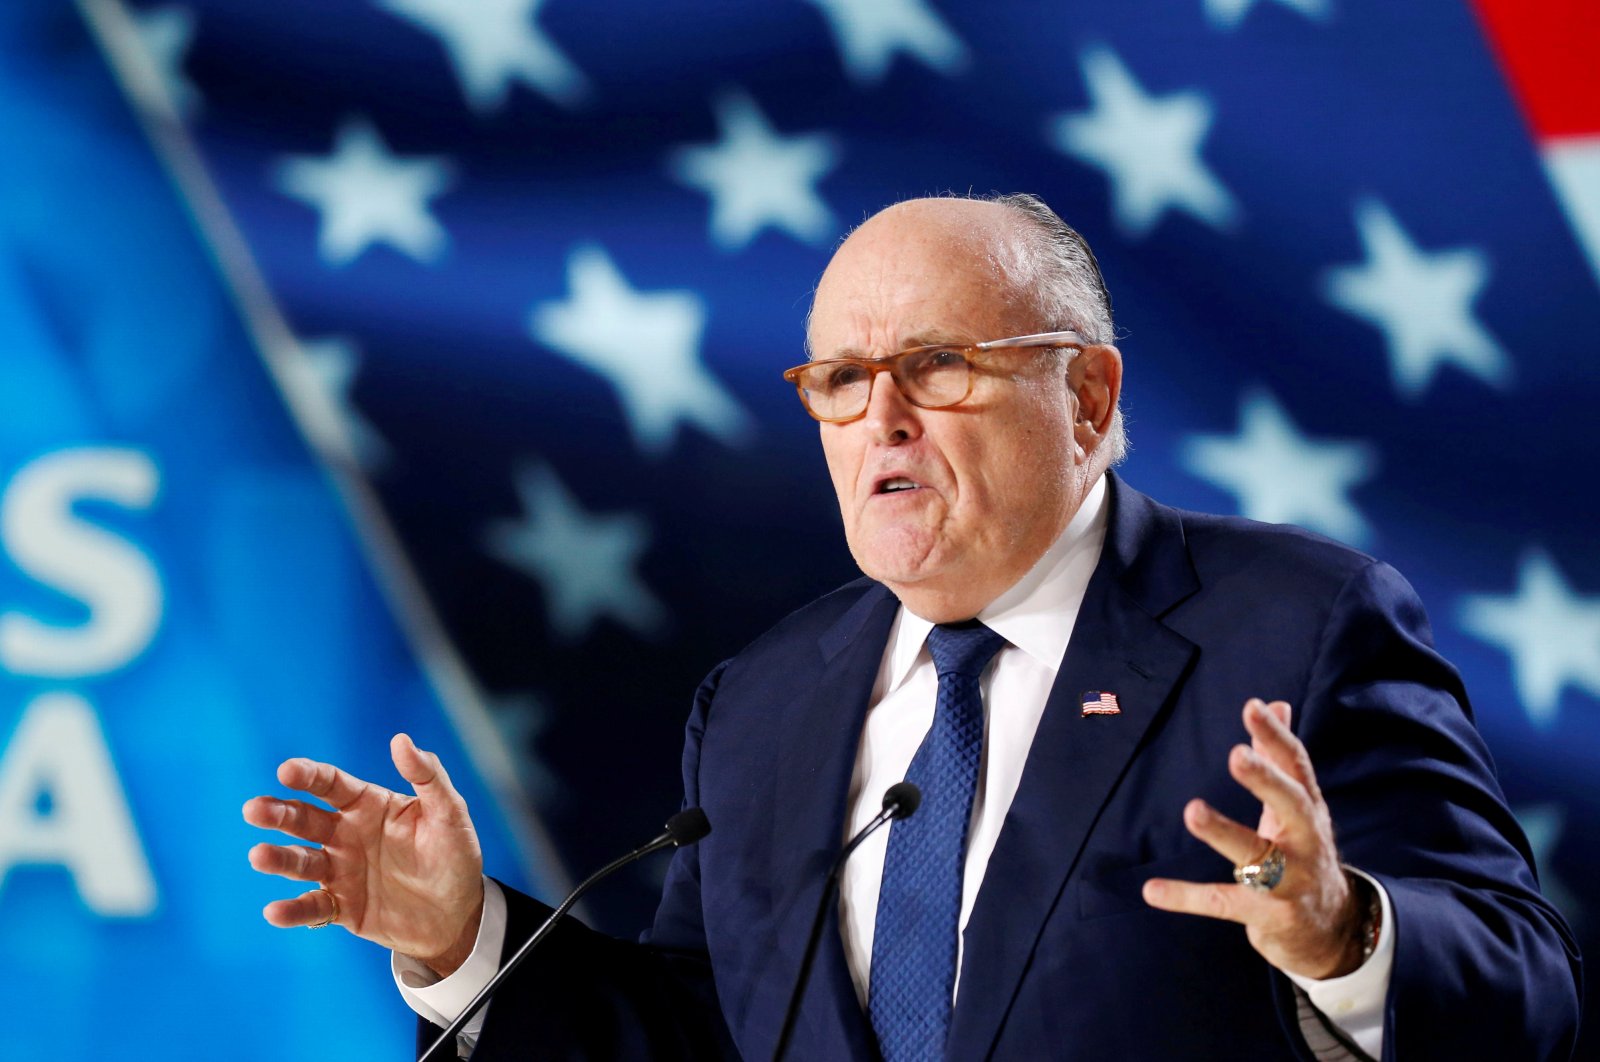 Rudy Giuliani, former Mayor of New York City, delivers his speech as he attends the National Council of Resistance of Iran (NCRI), meeting in Villepinte, near Paris, France on June 30, 2018.  (Reuters Photo)